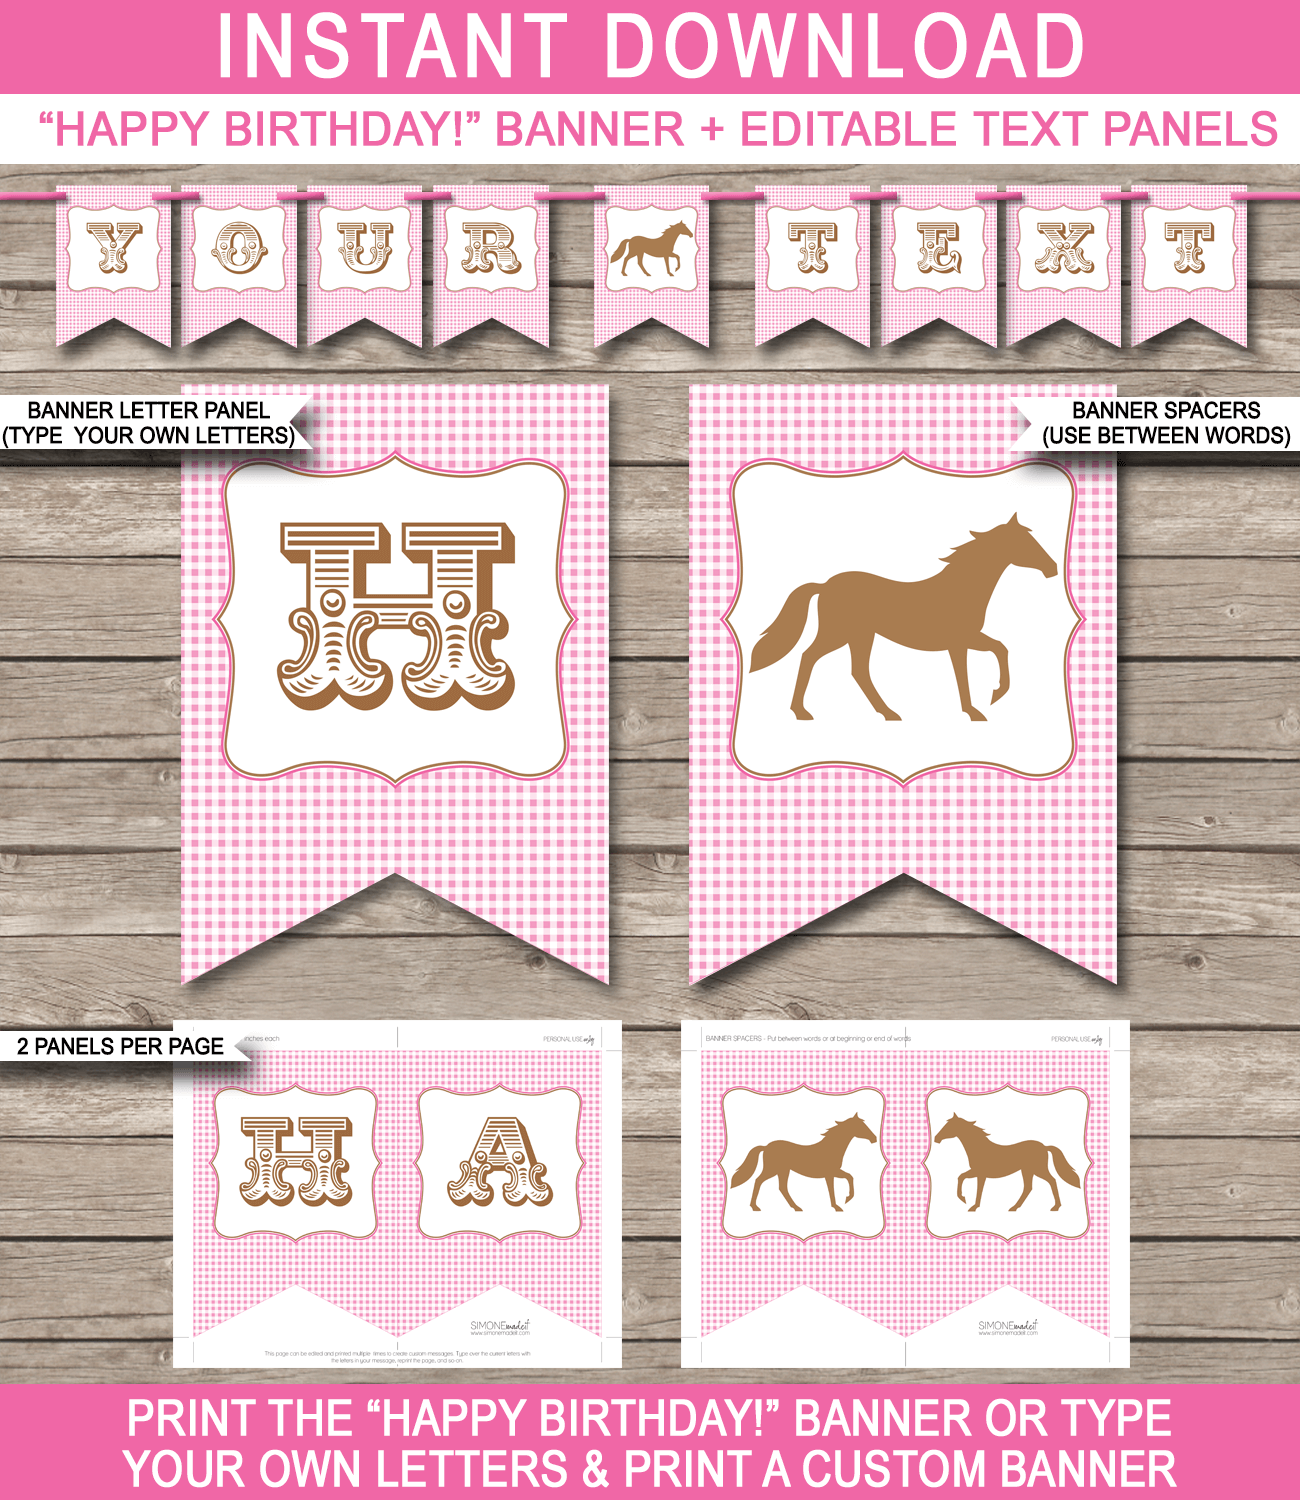 Horse or Pony Party Banner Template - Pony Bunting - Happy Birthday Banner - Birthday Party - Editable and Printable DIY Template - INSTANT DOWNLOAD $4.50 via simonemadeit.com